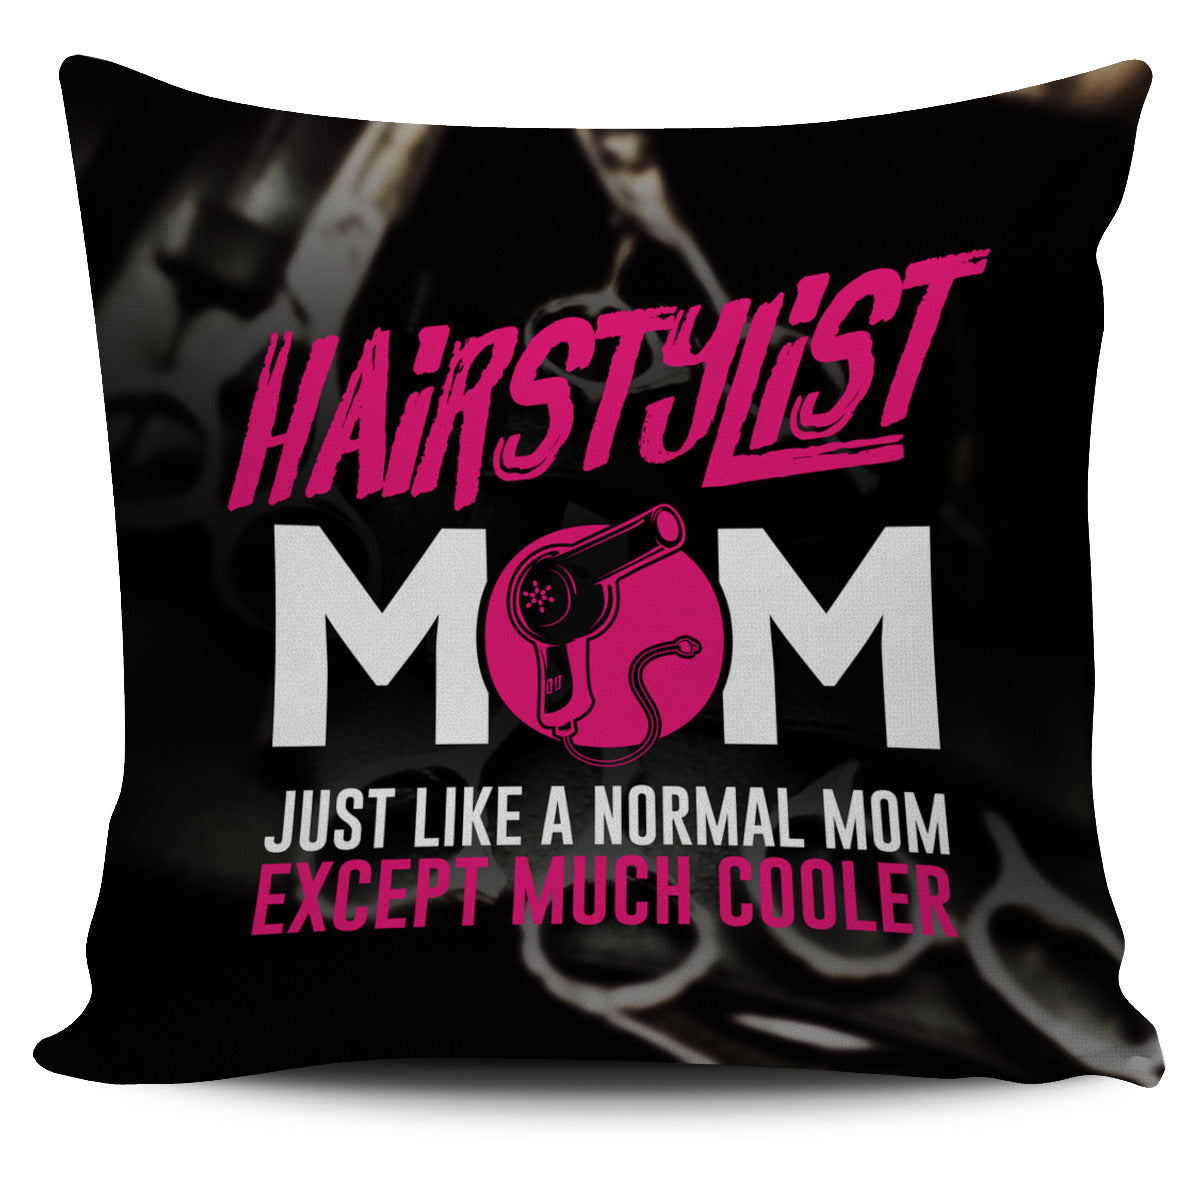 Hairstylist Mom Pillow Cover